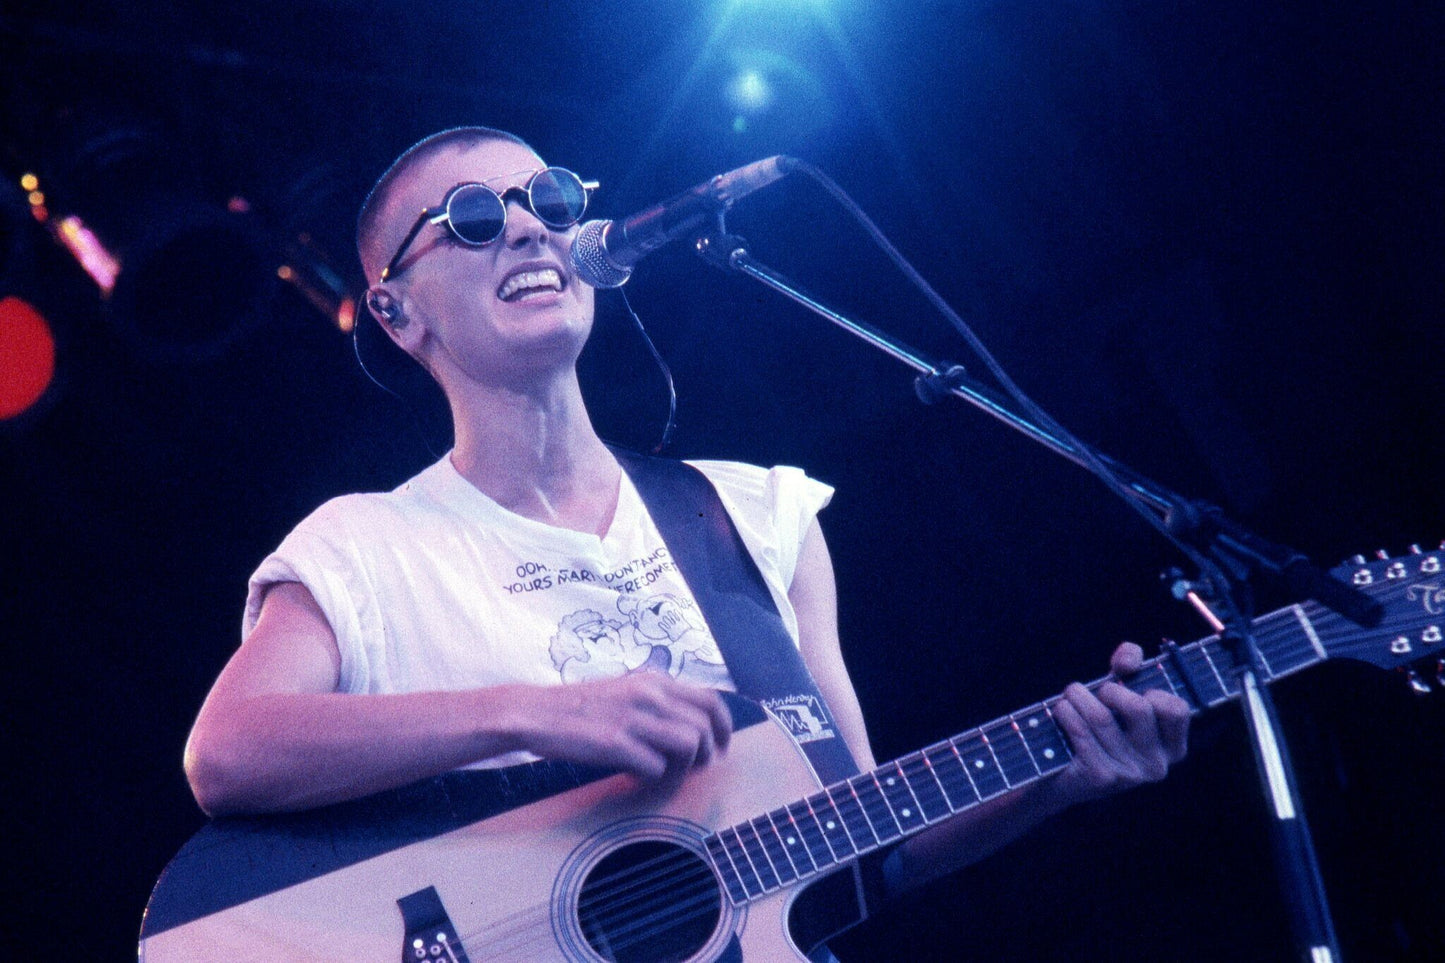 Sinead O'Connor - Playing Guitar and Singing on Stage, England, 1994 Poster